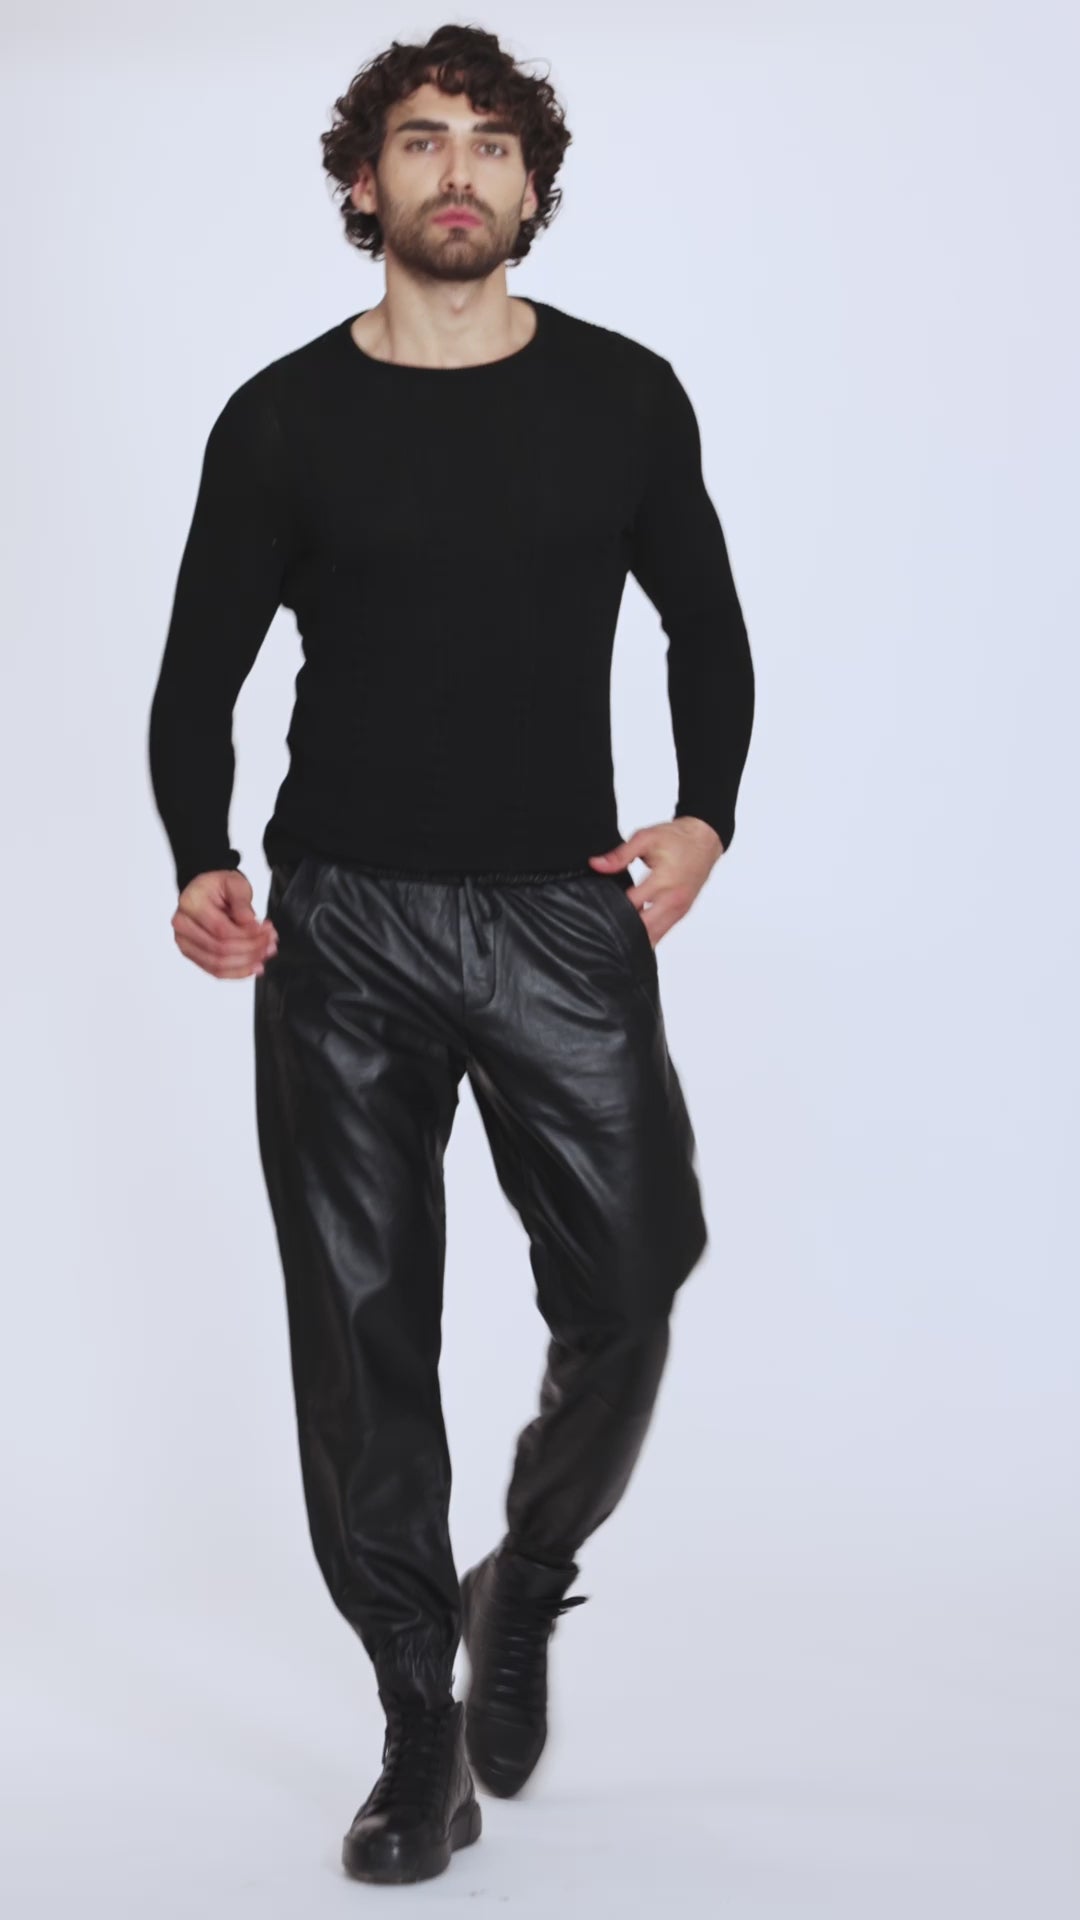 What are the disadvantages of faux leather pants? - Quora